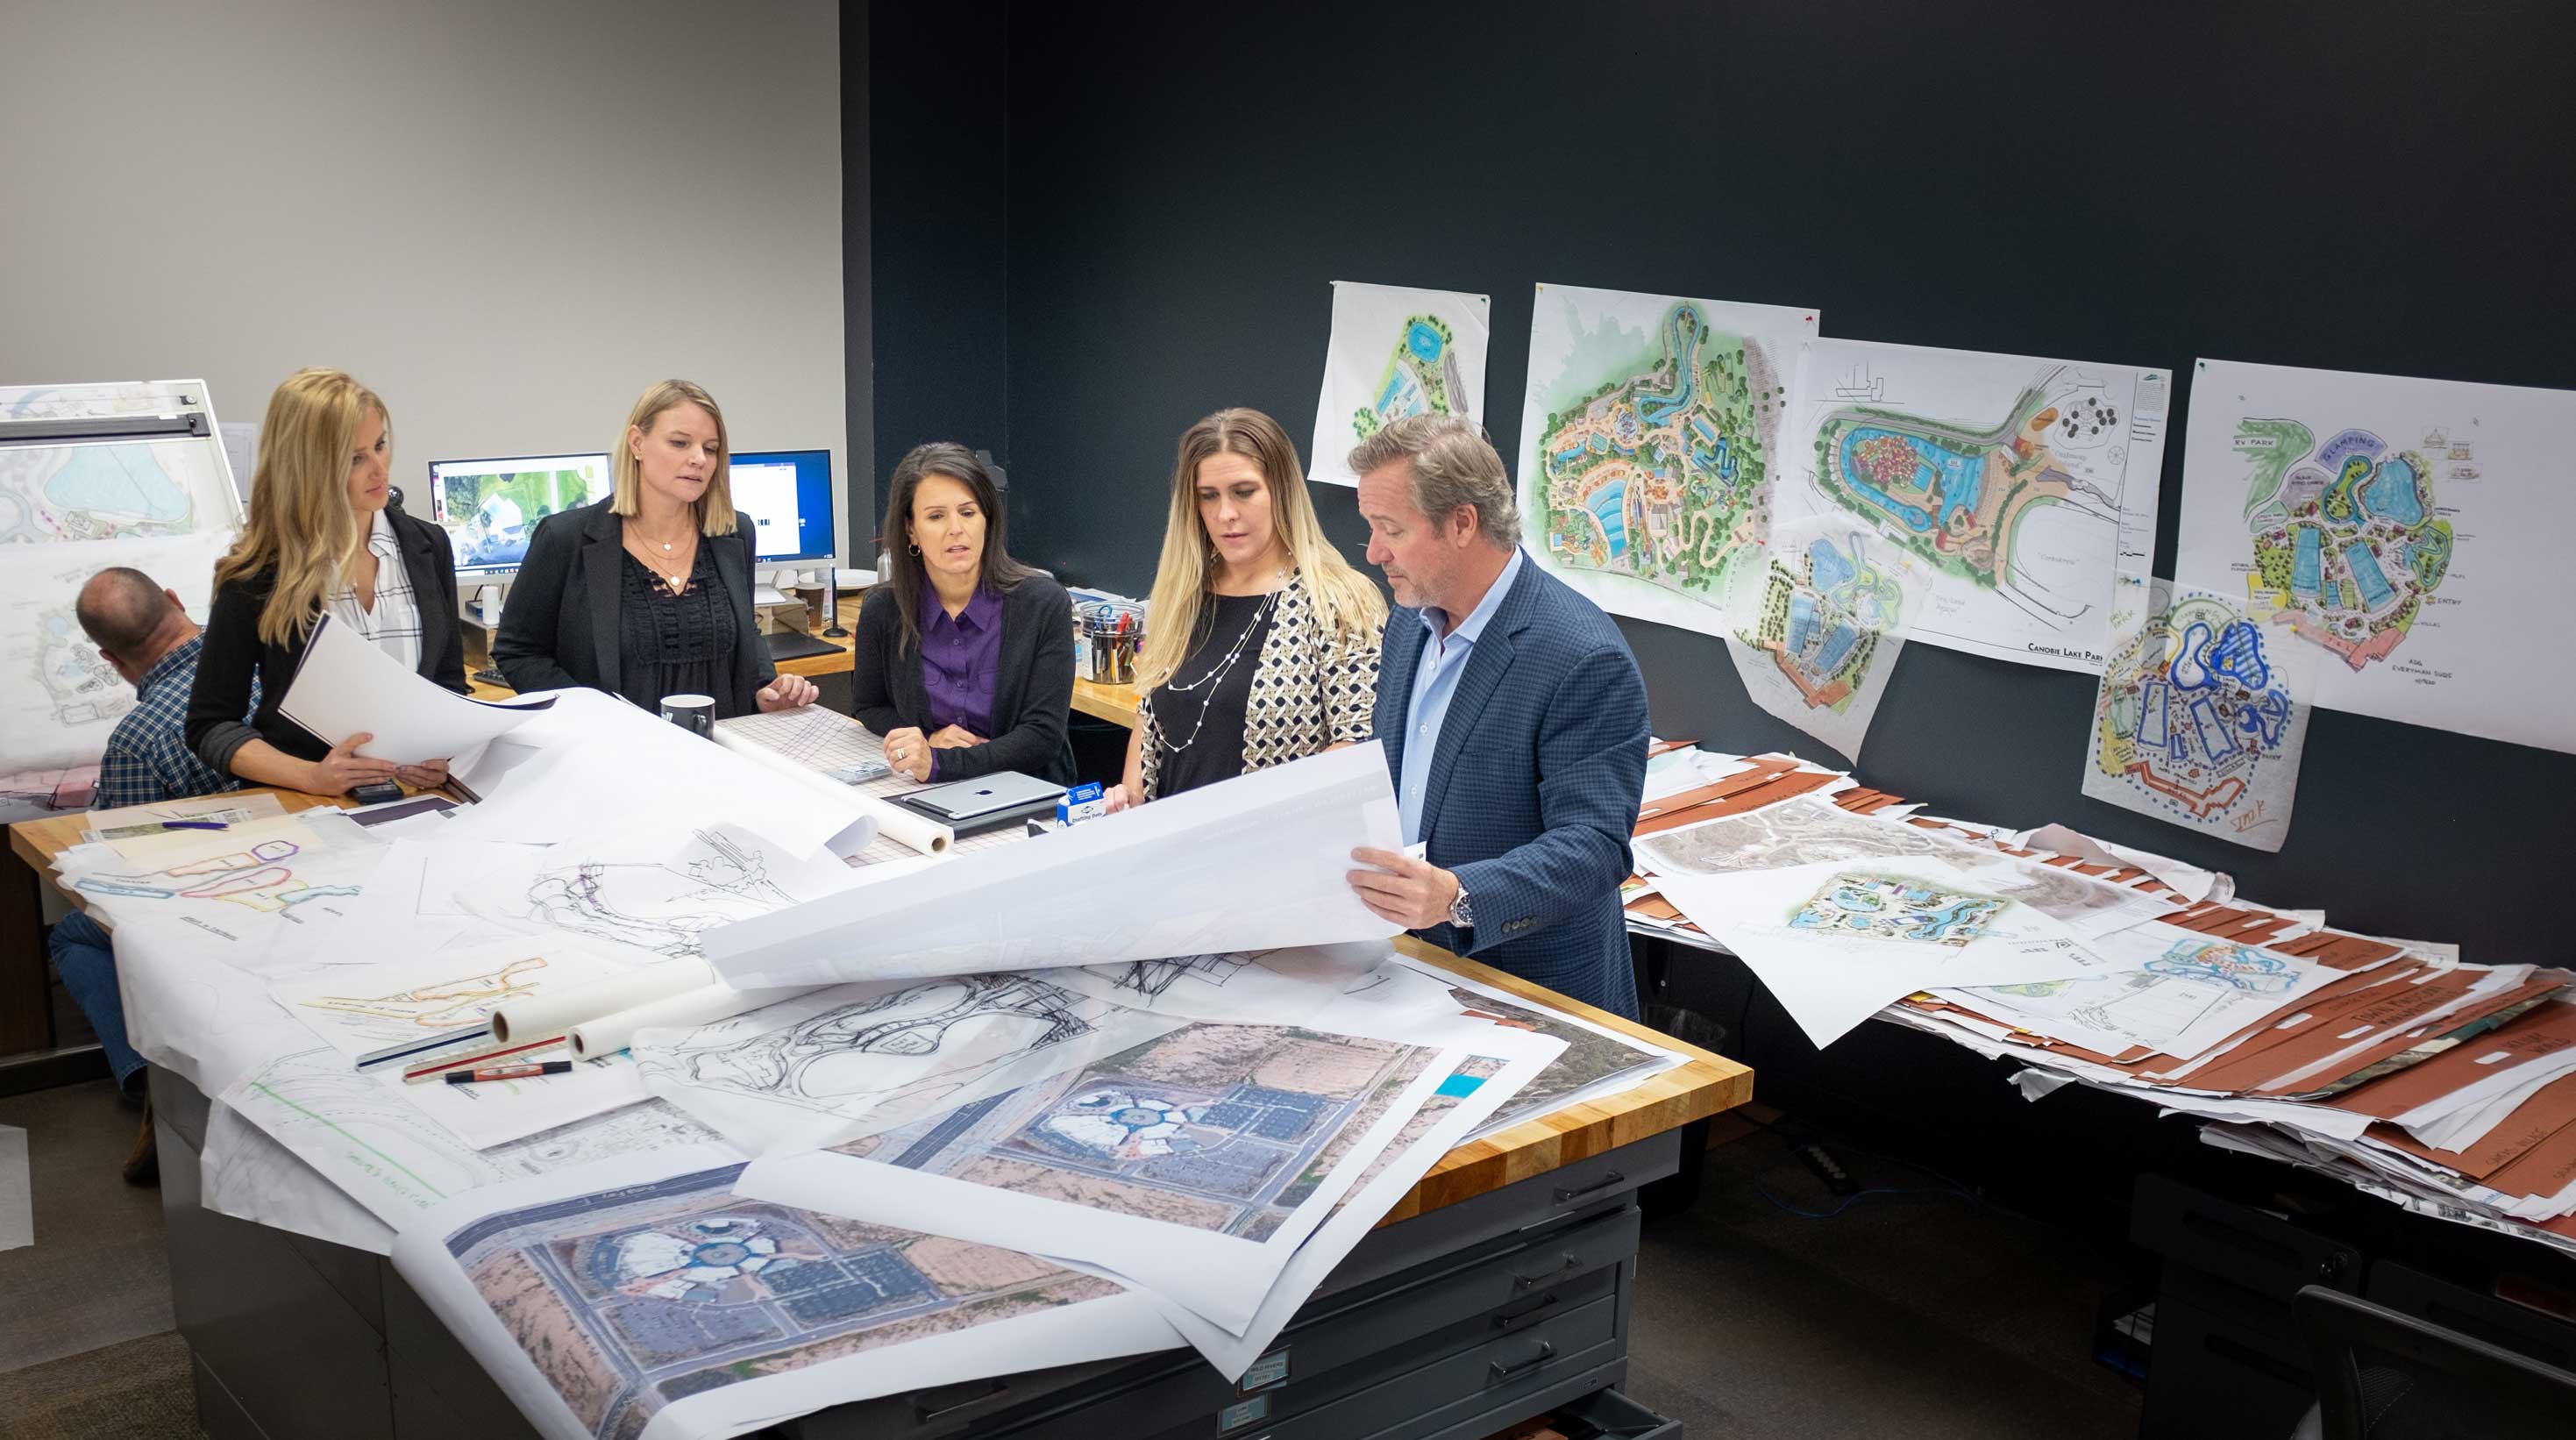 BST Advisors with clients around large blueprints and drawings